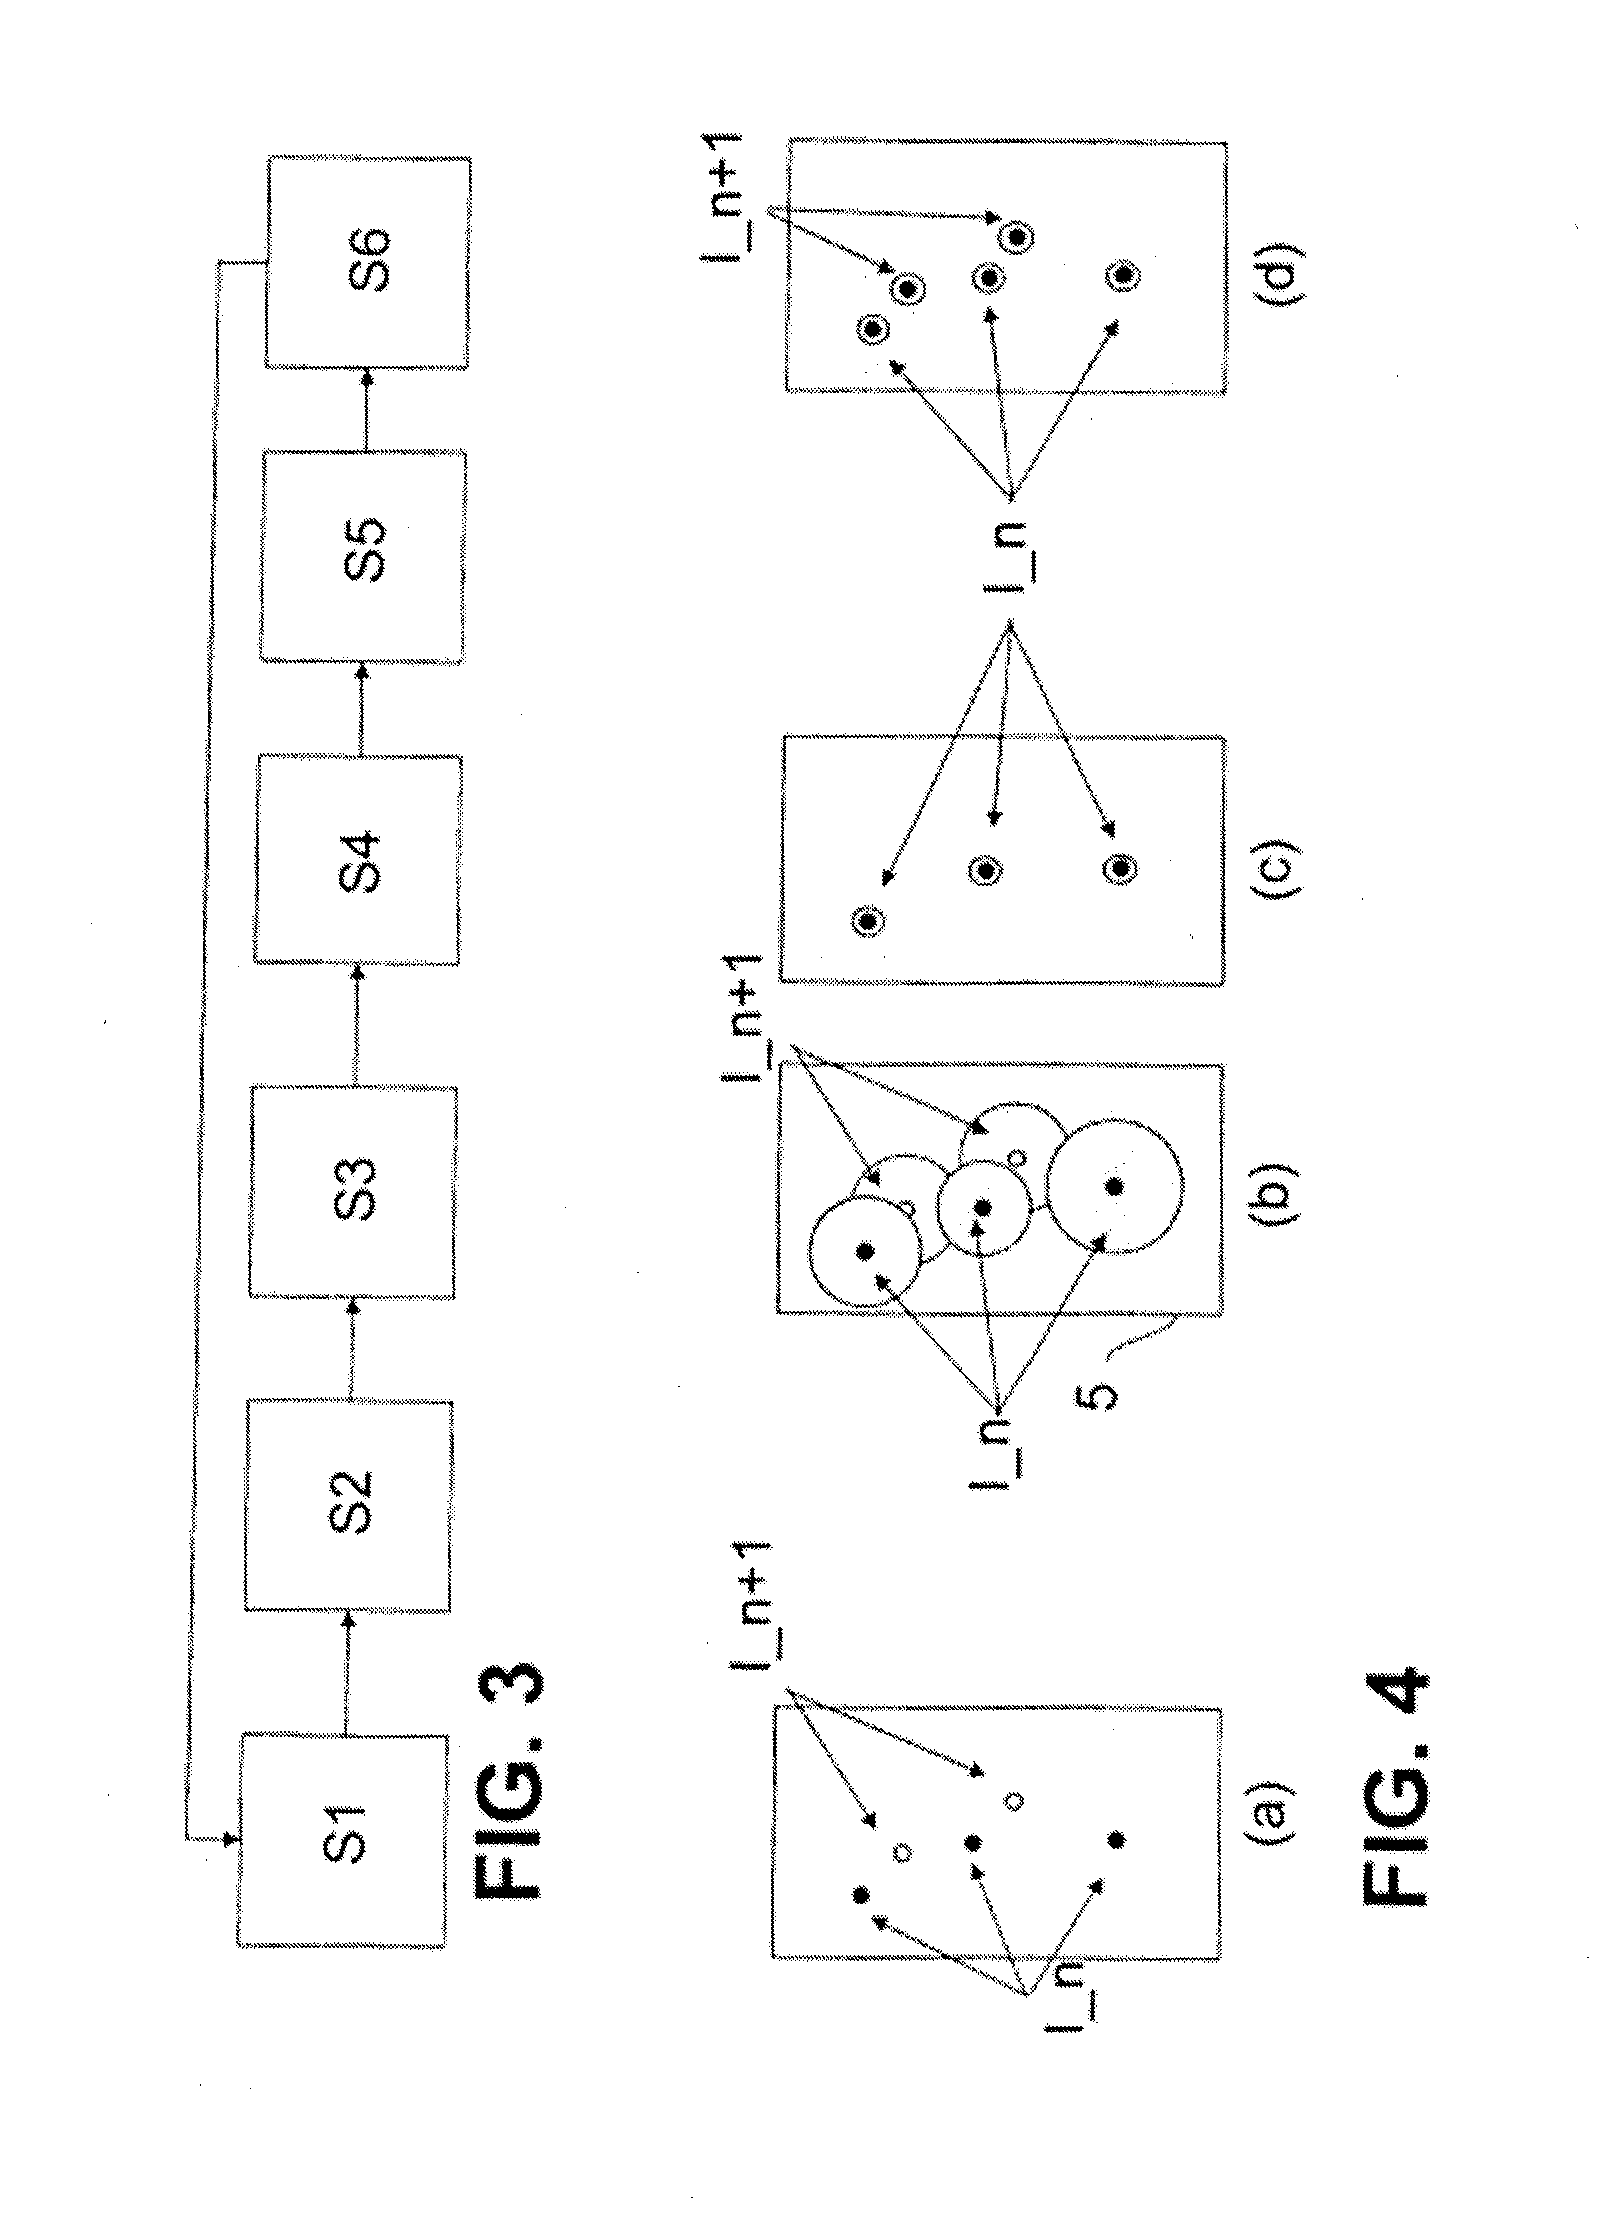 Method for High-Resolution 3D Localization Microscopy